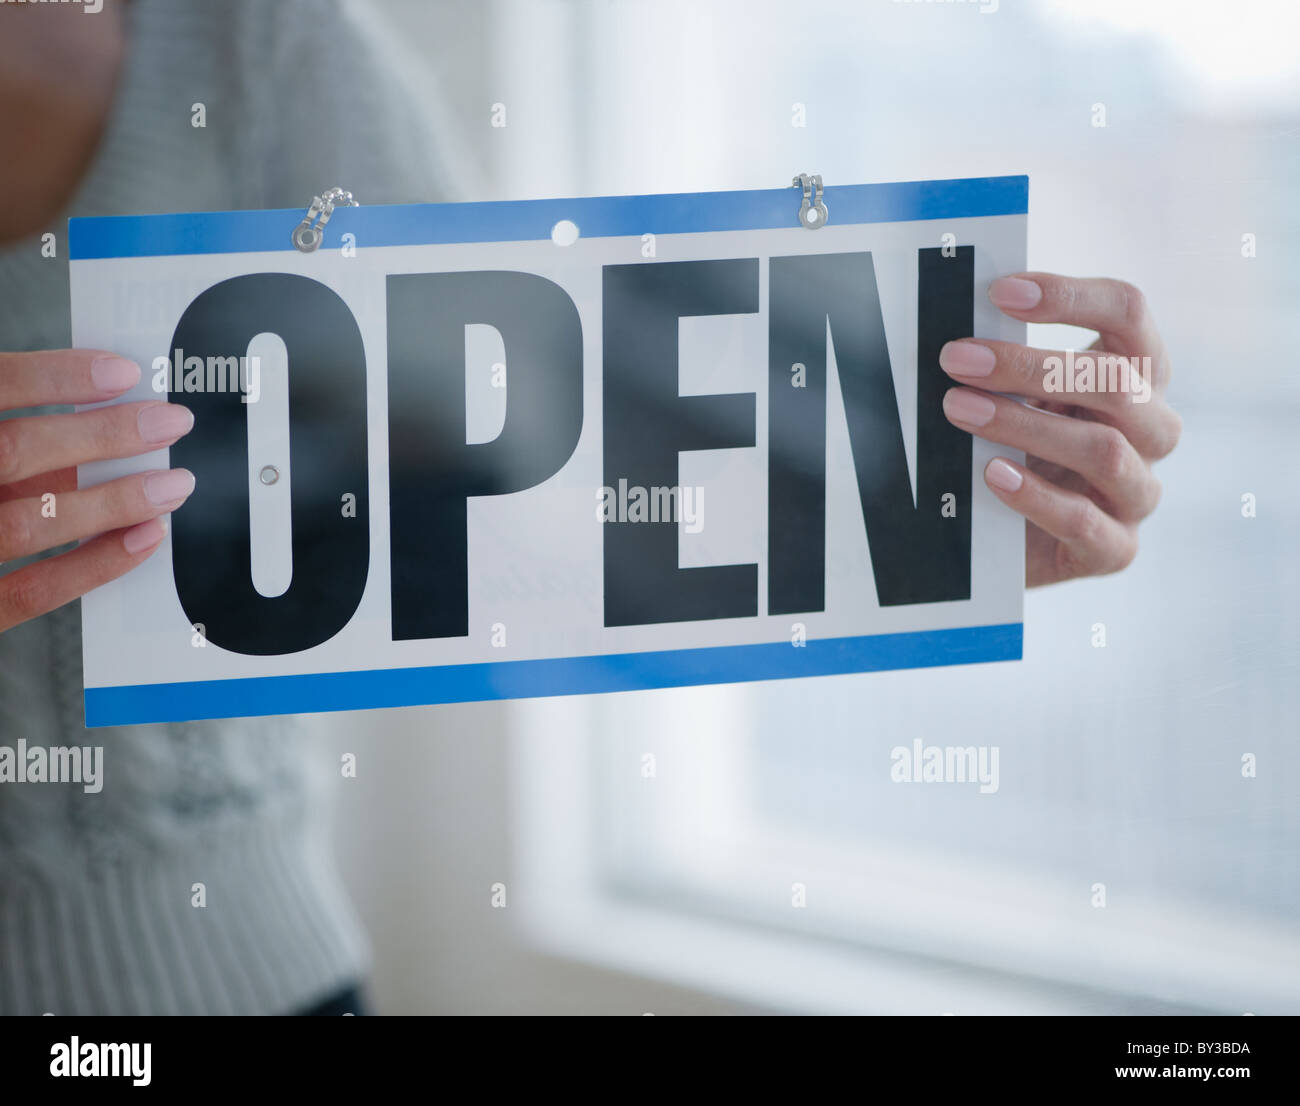 USA, New Jersey, Jersey City, Close-up view of woman holding open sign Banque D'Images